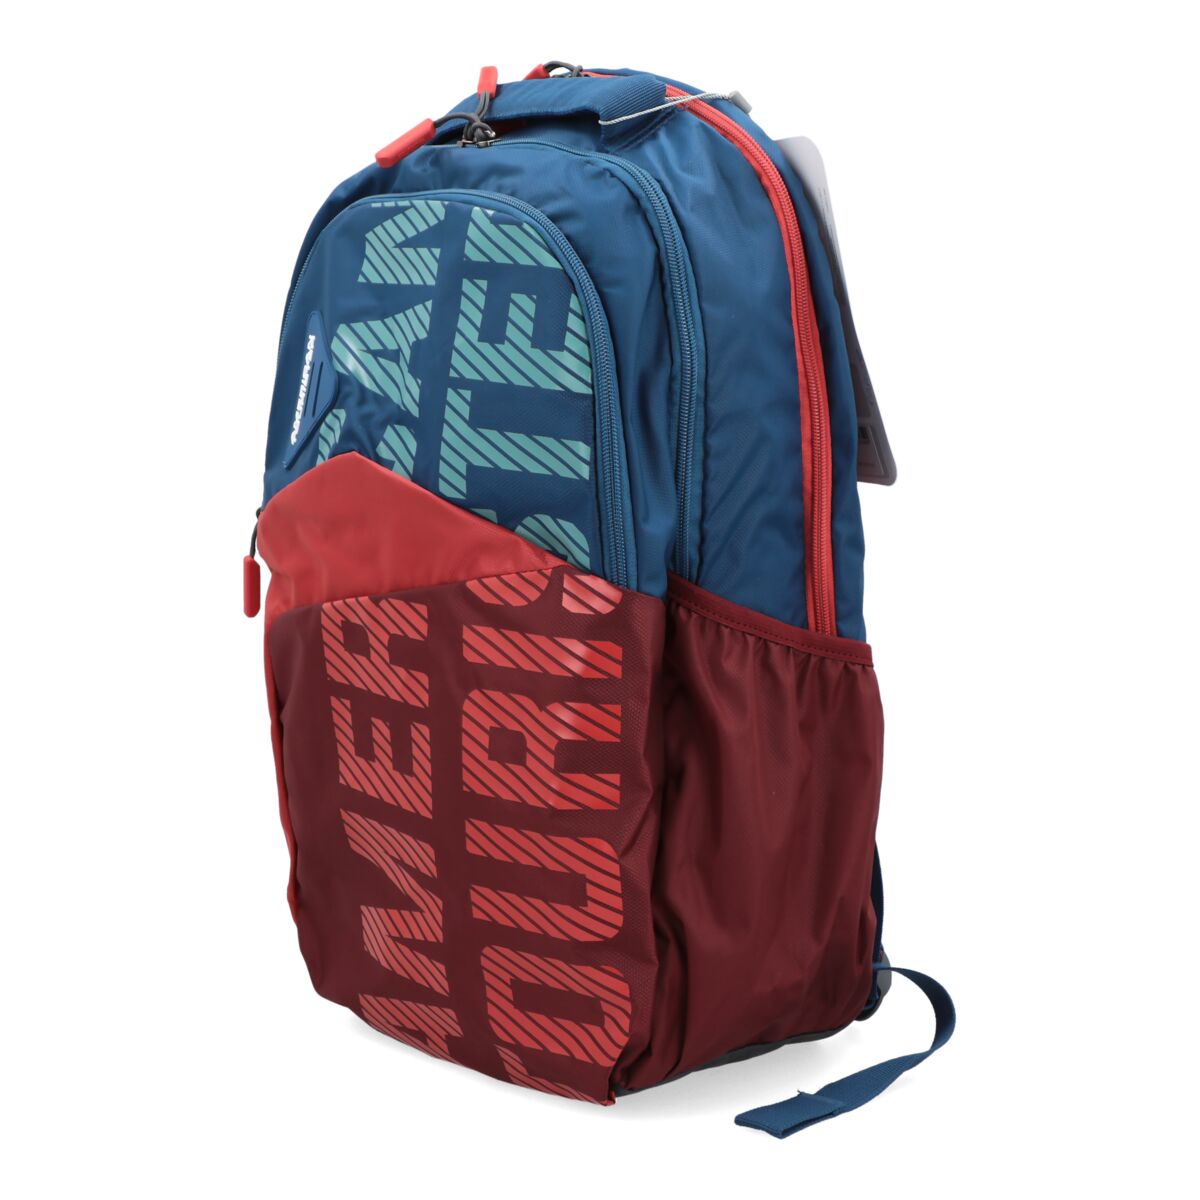 American Tourister Polyester Durable and Lightweight Sest Colorblock Backpack Blue and Red